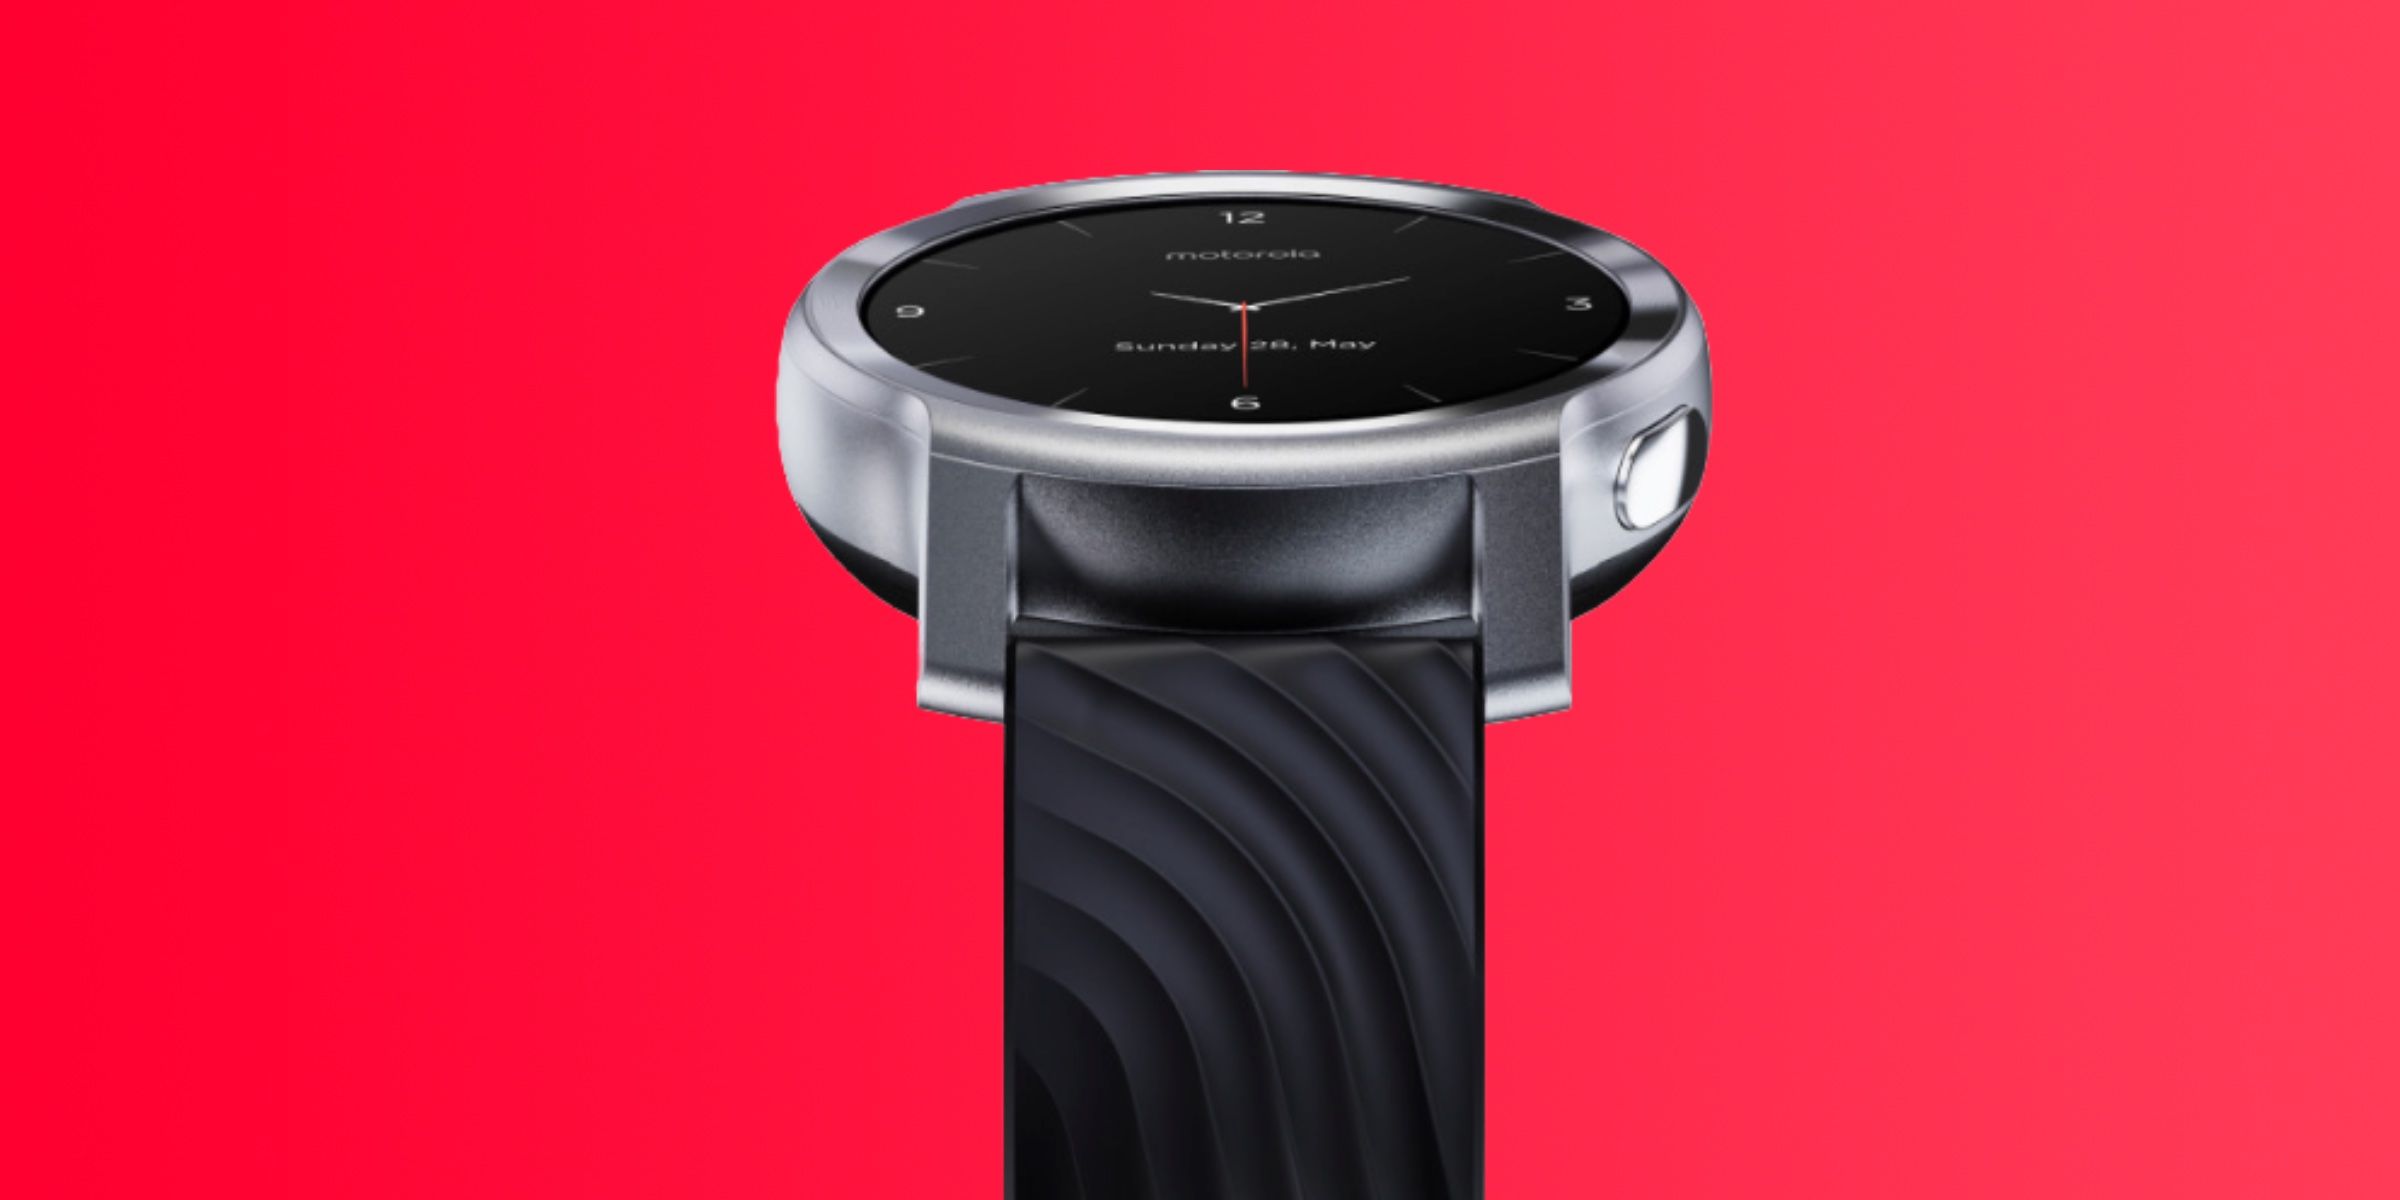 The Moto Watch 100 smartwatch against a red gradient background.